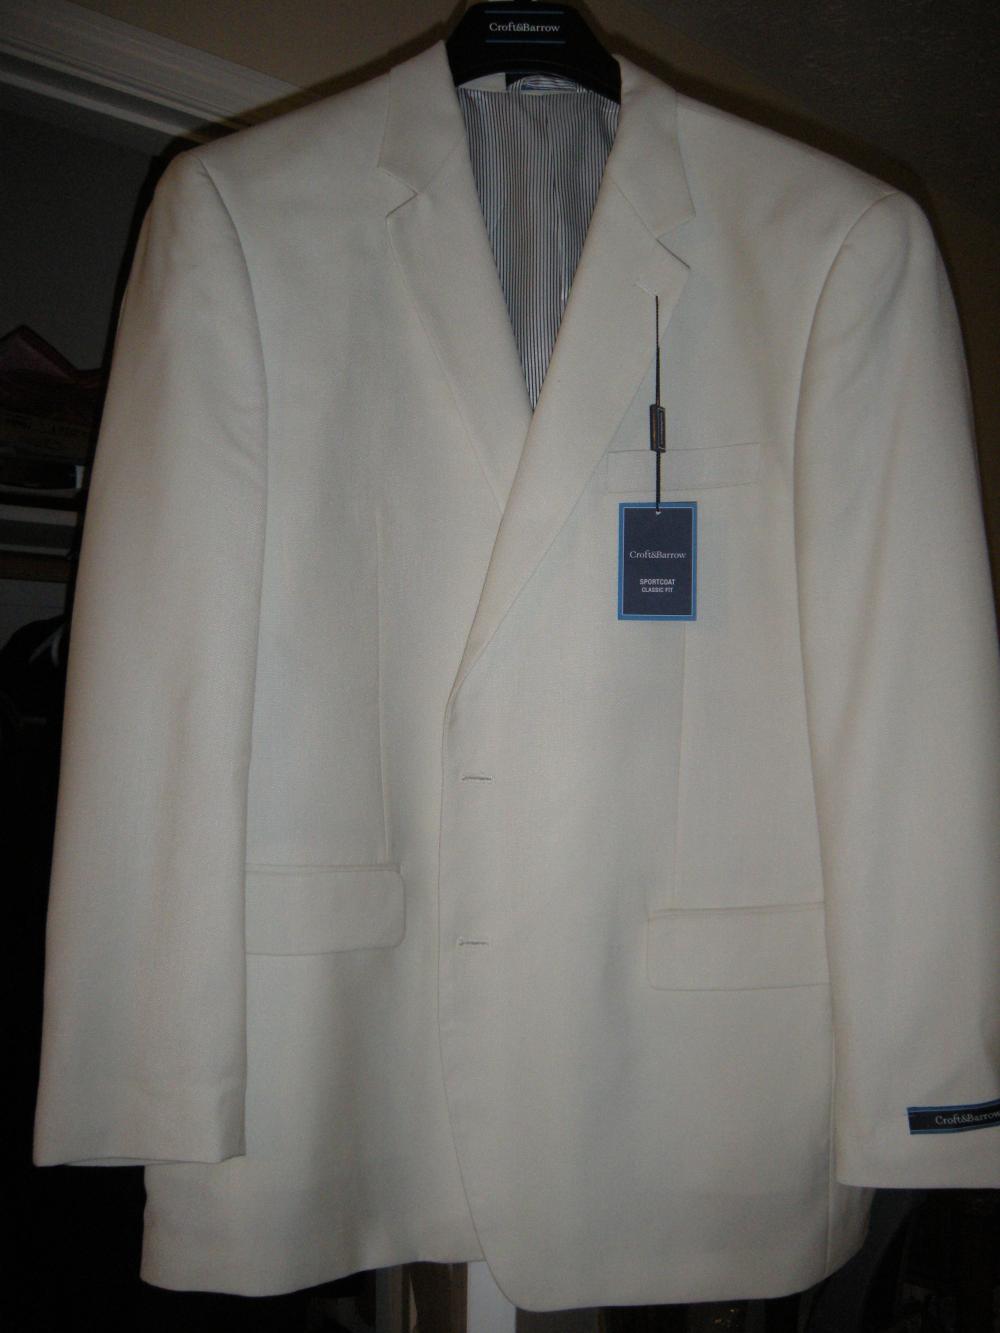 Brand New Off White/Ivory Suit Jacket